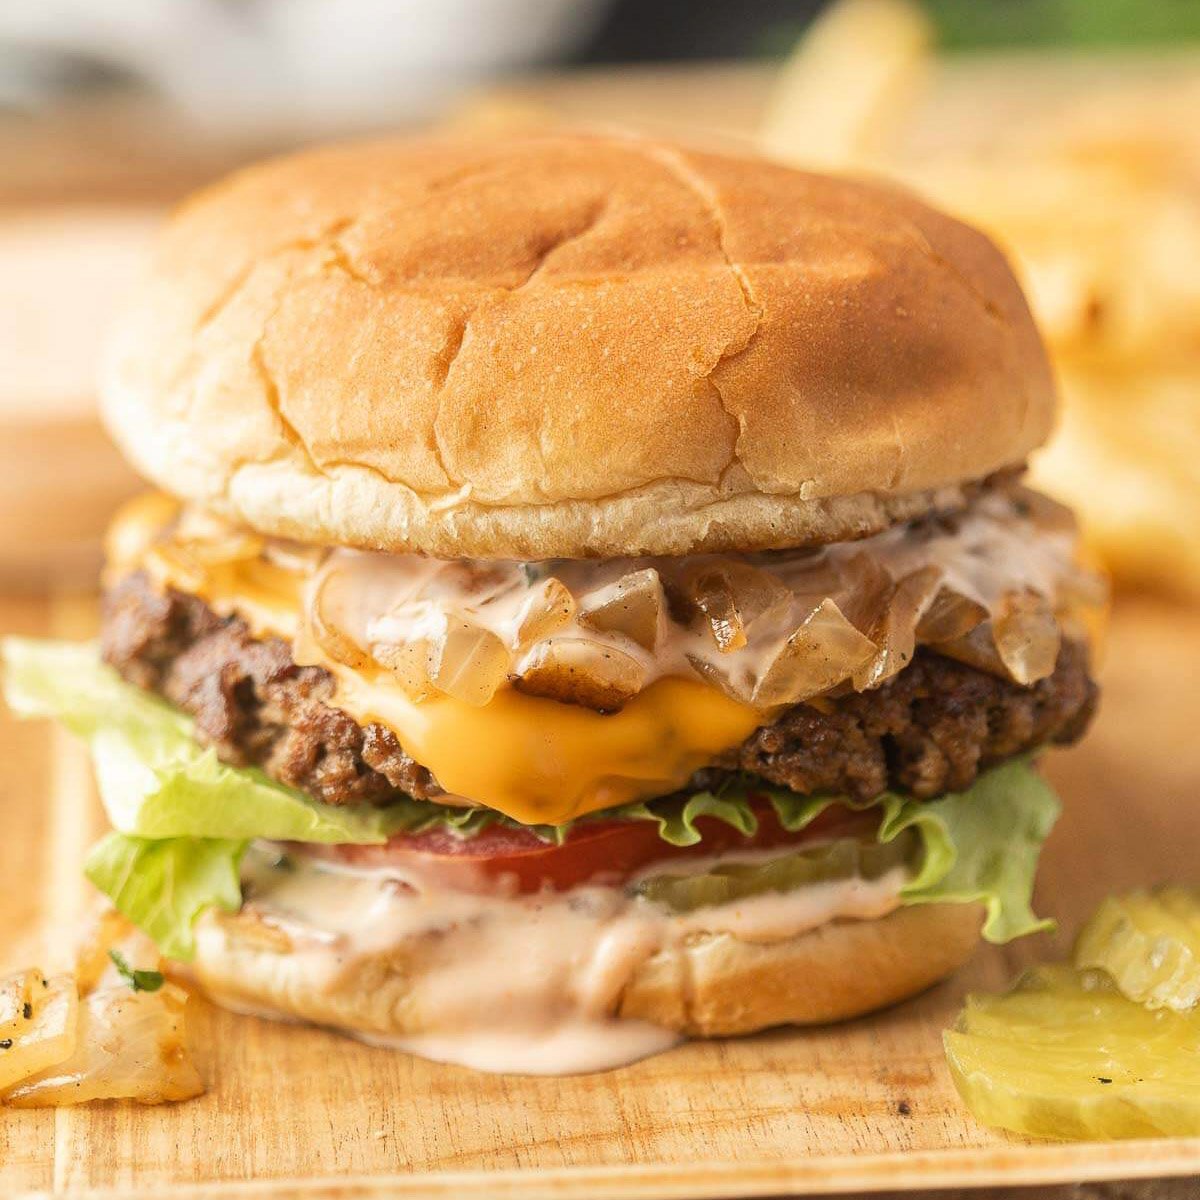 https://www.eatingonadime.com/wp-content/uploads/2022/08/in-and-out-animal-style-burger-6-1.jpg